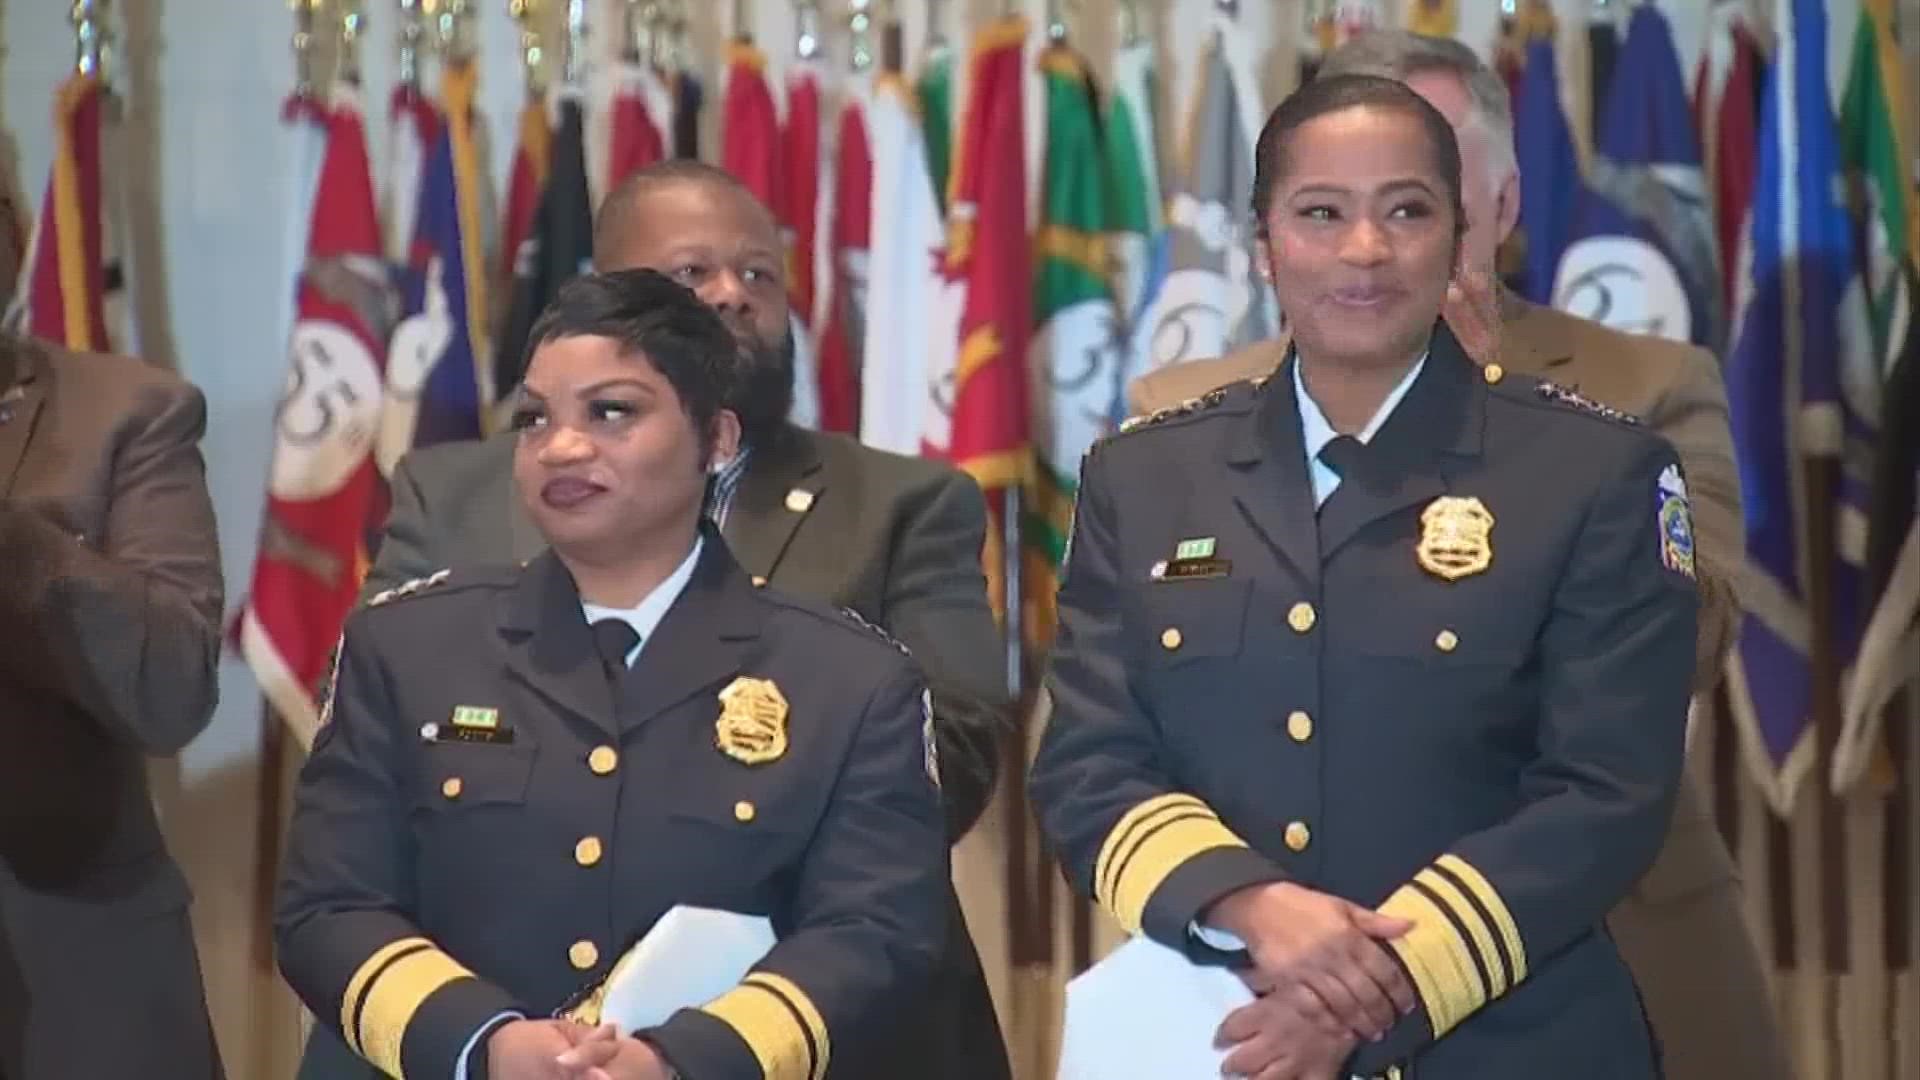 Columbus Police Chief Elaine Bryant and 1st Assistant Chief LaShanna Potts passed their OPOTA exams to officially become peace officers in the state.